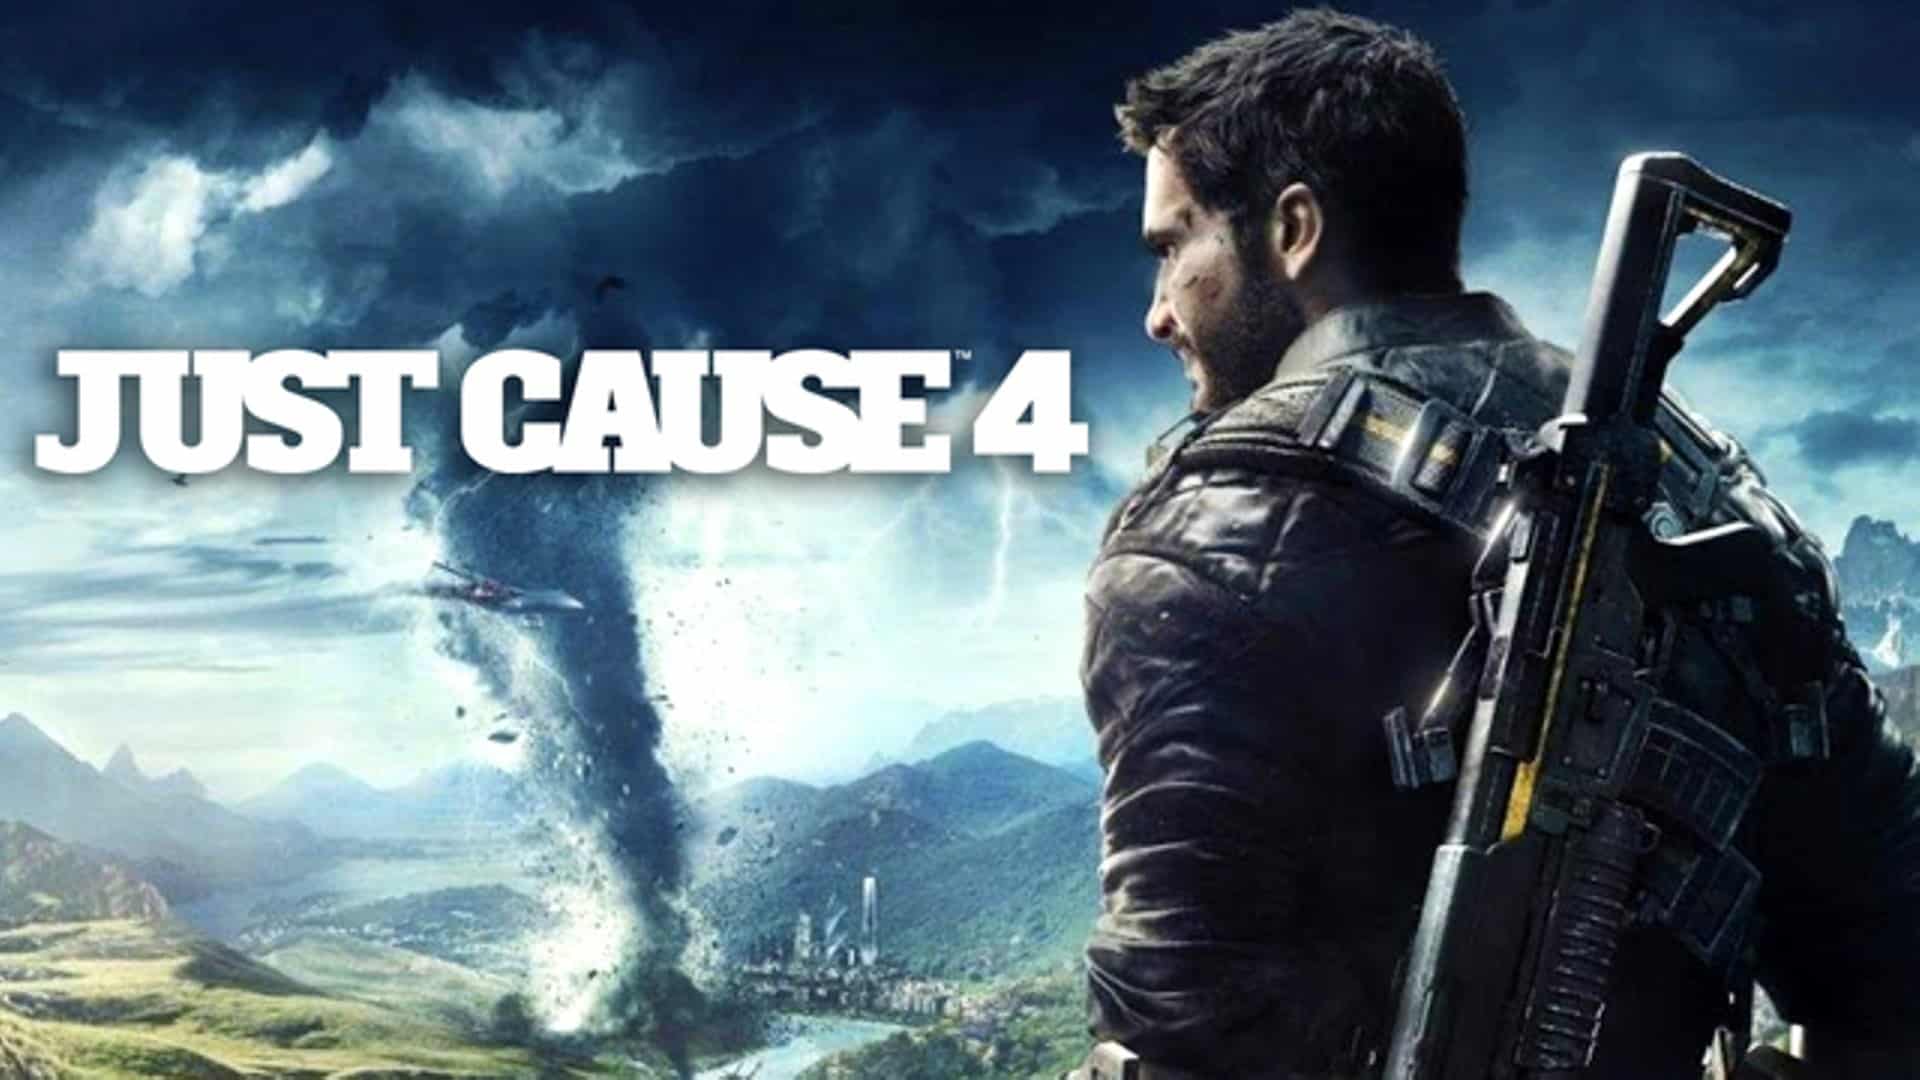 just cause 4 download for android